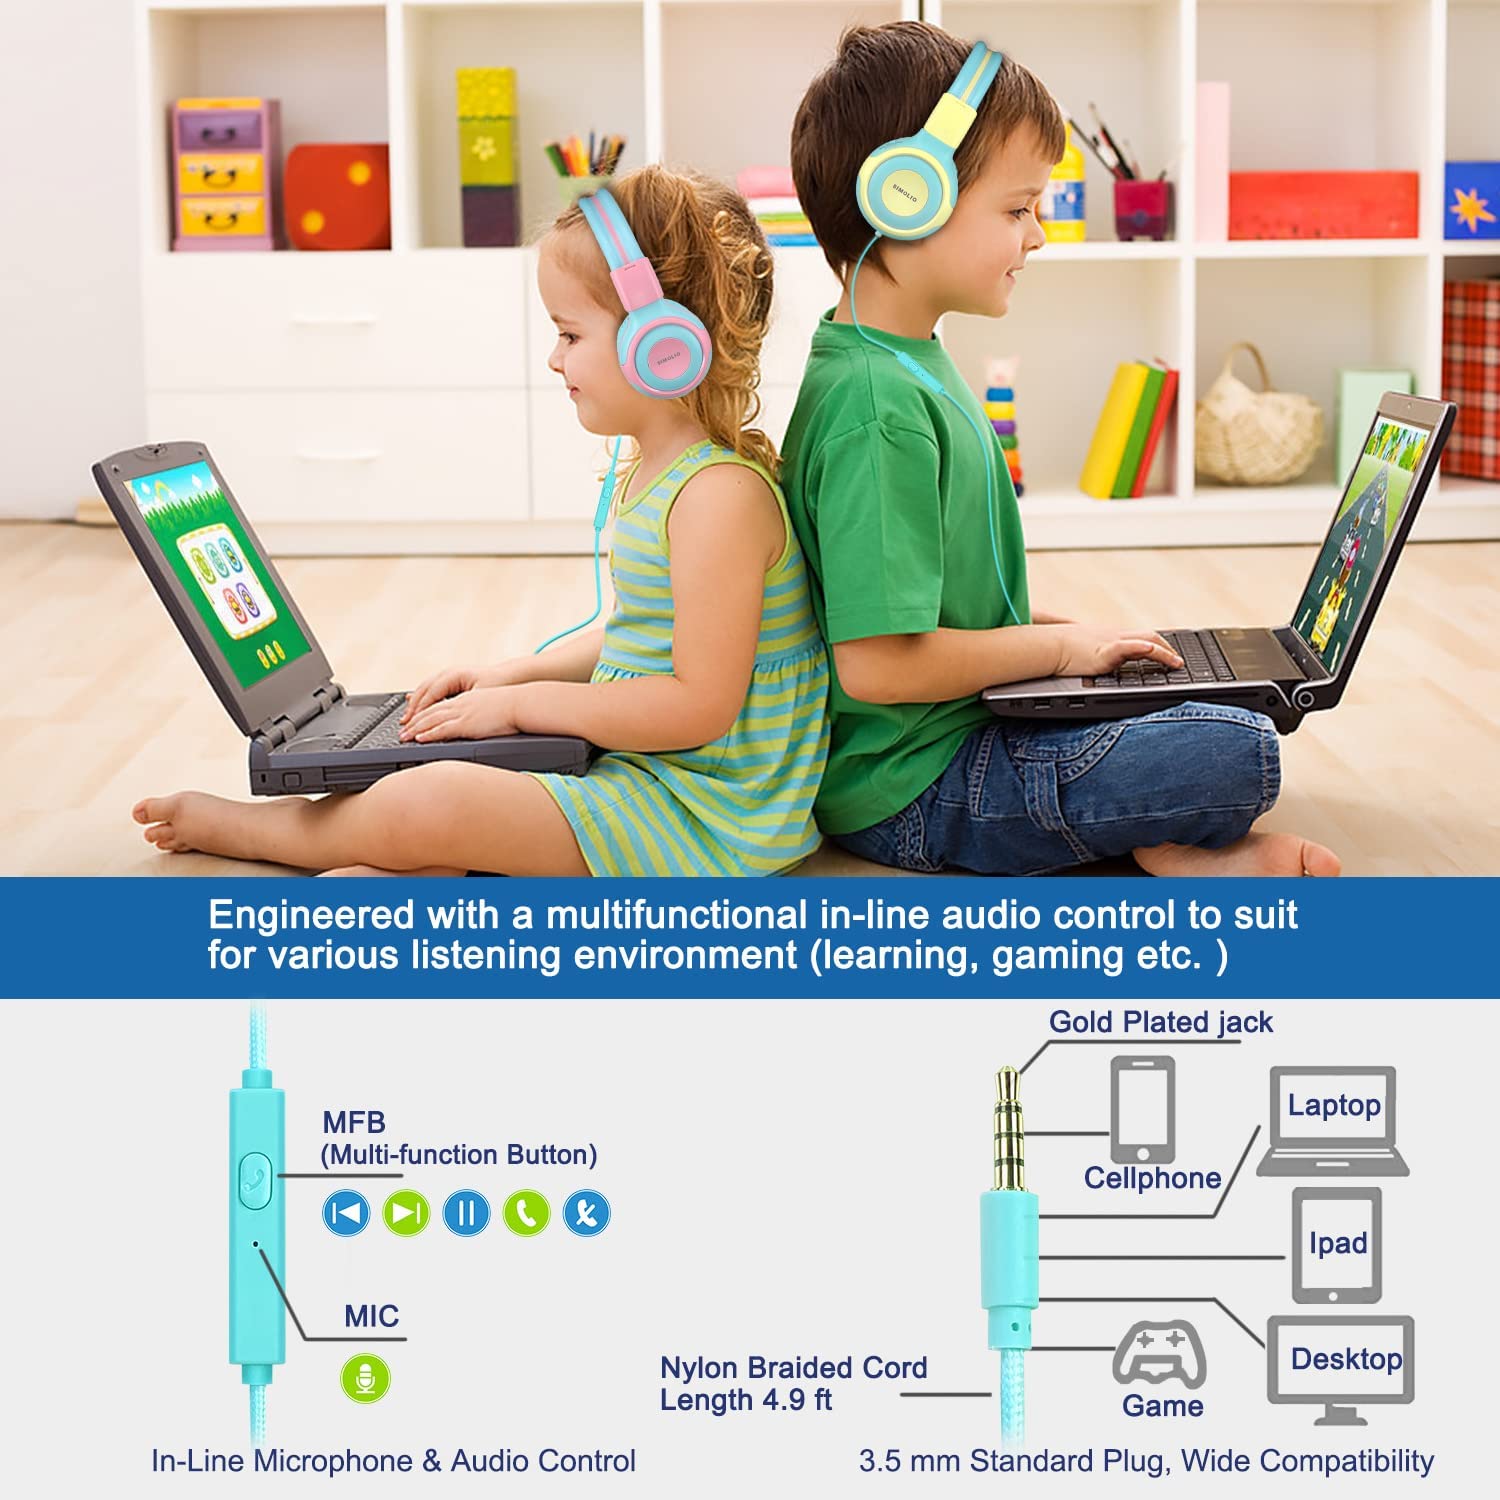 Simolio SM-903 wired headphones for kids are compatible with any device with 3.5mm audio outport